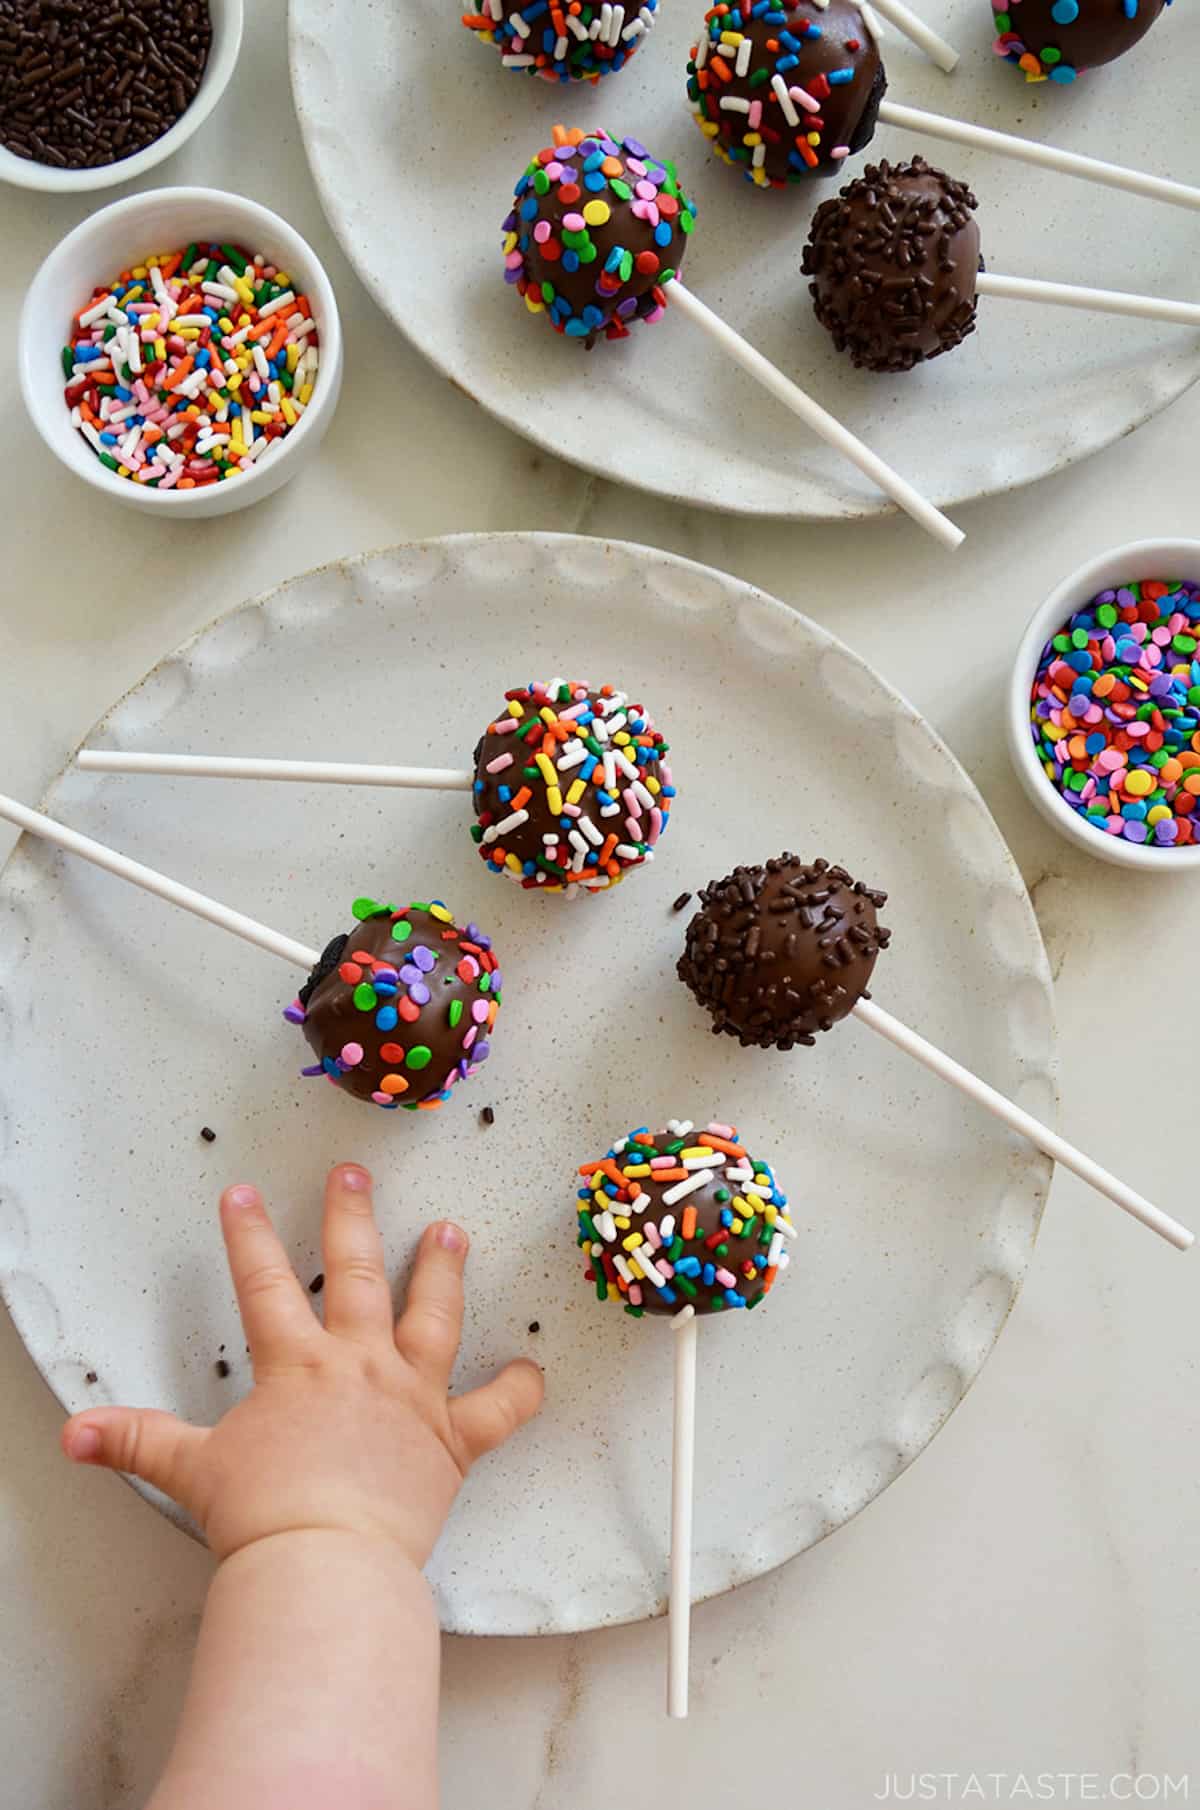 A child's hand reaches for a chocolate cookie pop with sprinkles on a white plate.